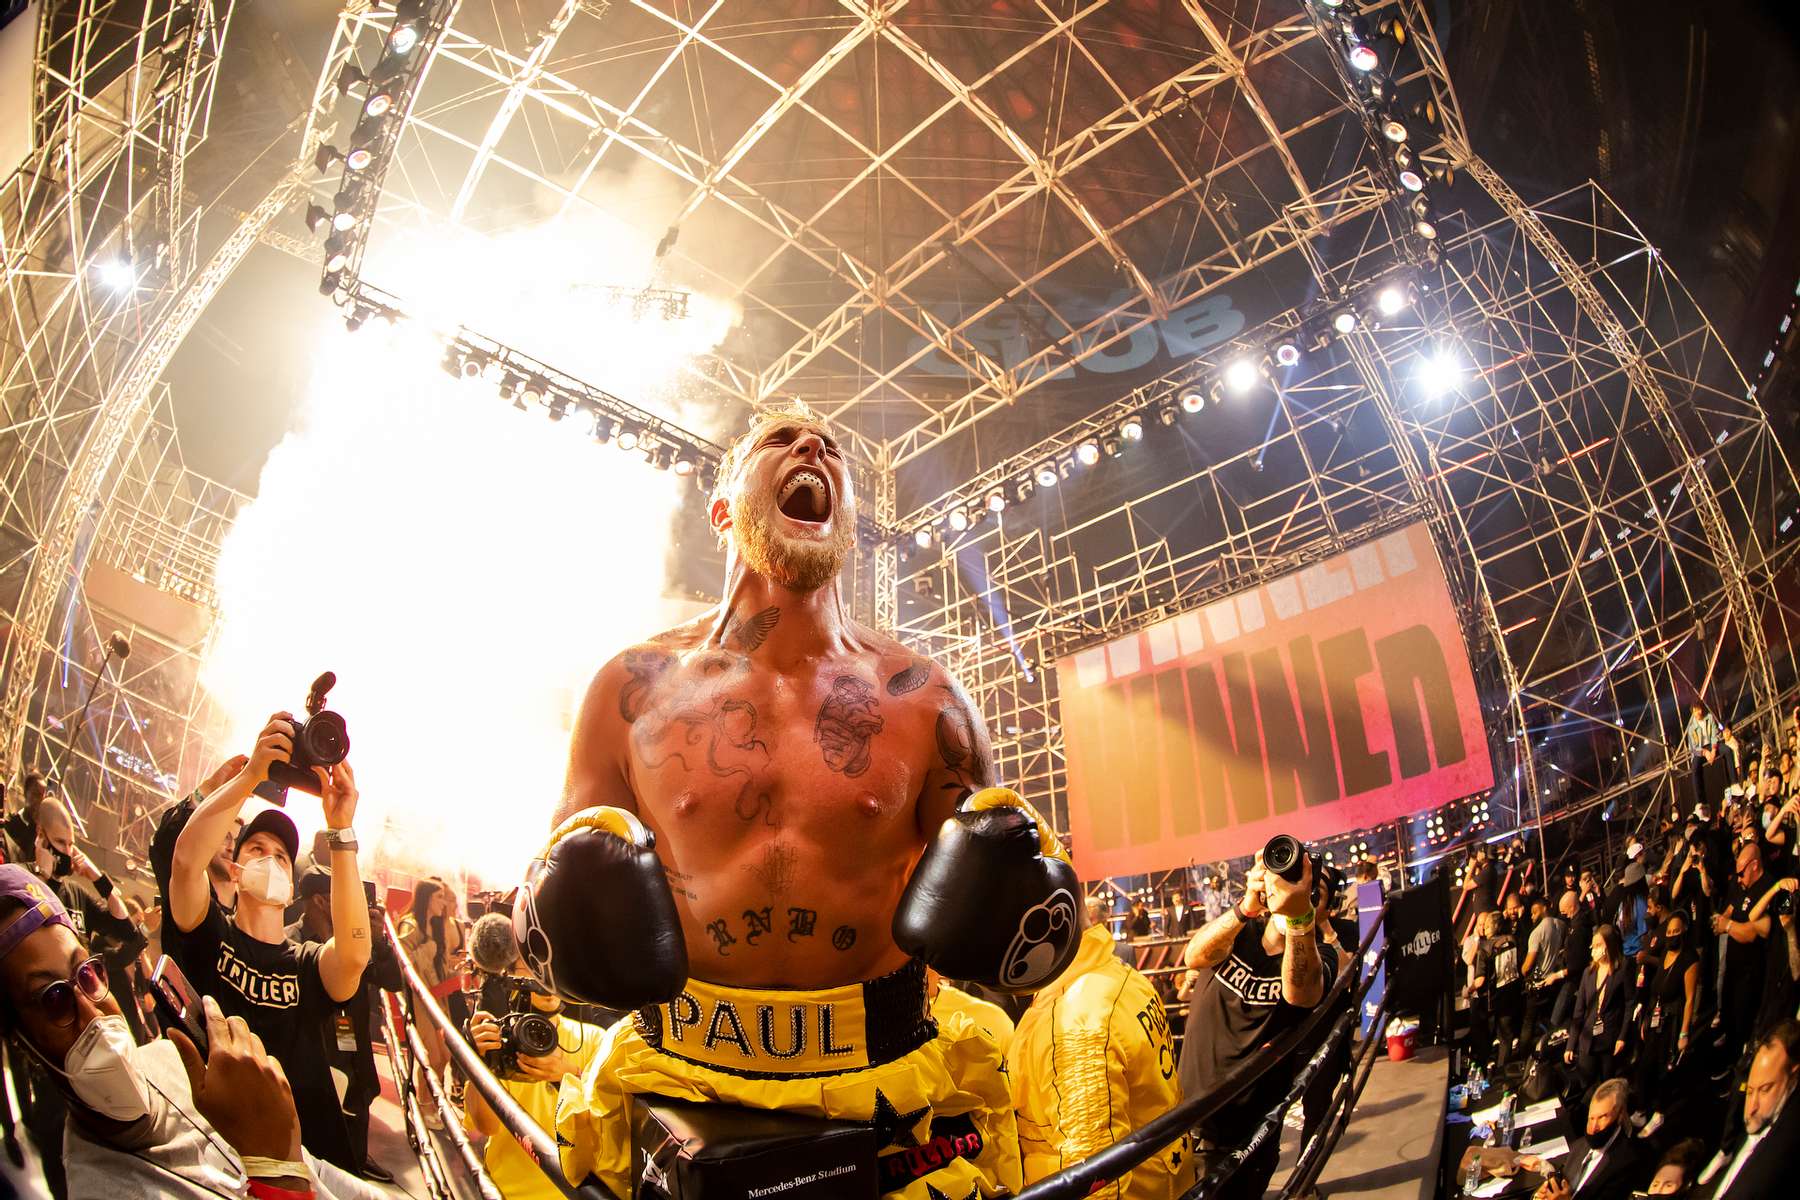 Jake Paul celebrates after defeating Ben Askren in their cruiserweight bout during Triller Fight Club at Mercedes-Benz Stadium on April 17, 2021 in Atlanta, Georgia. 